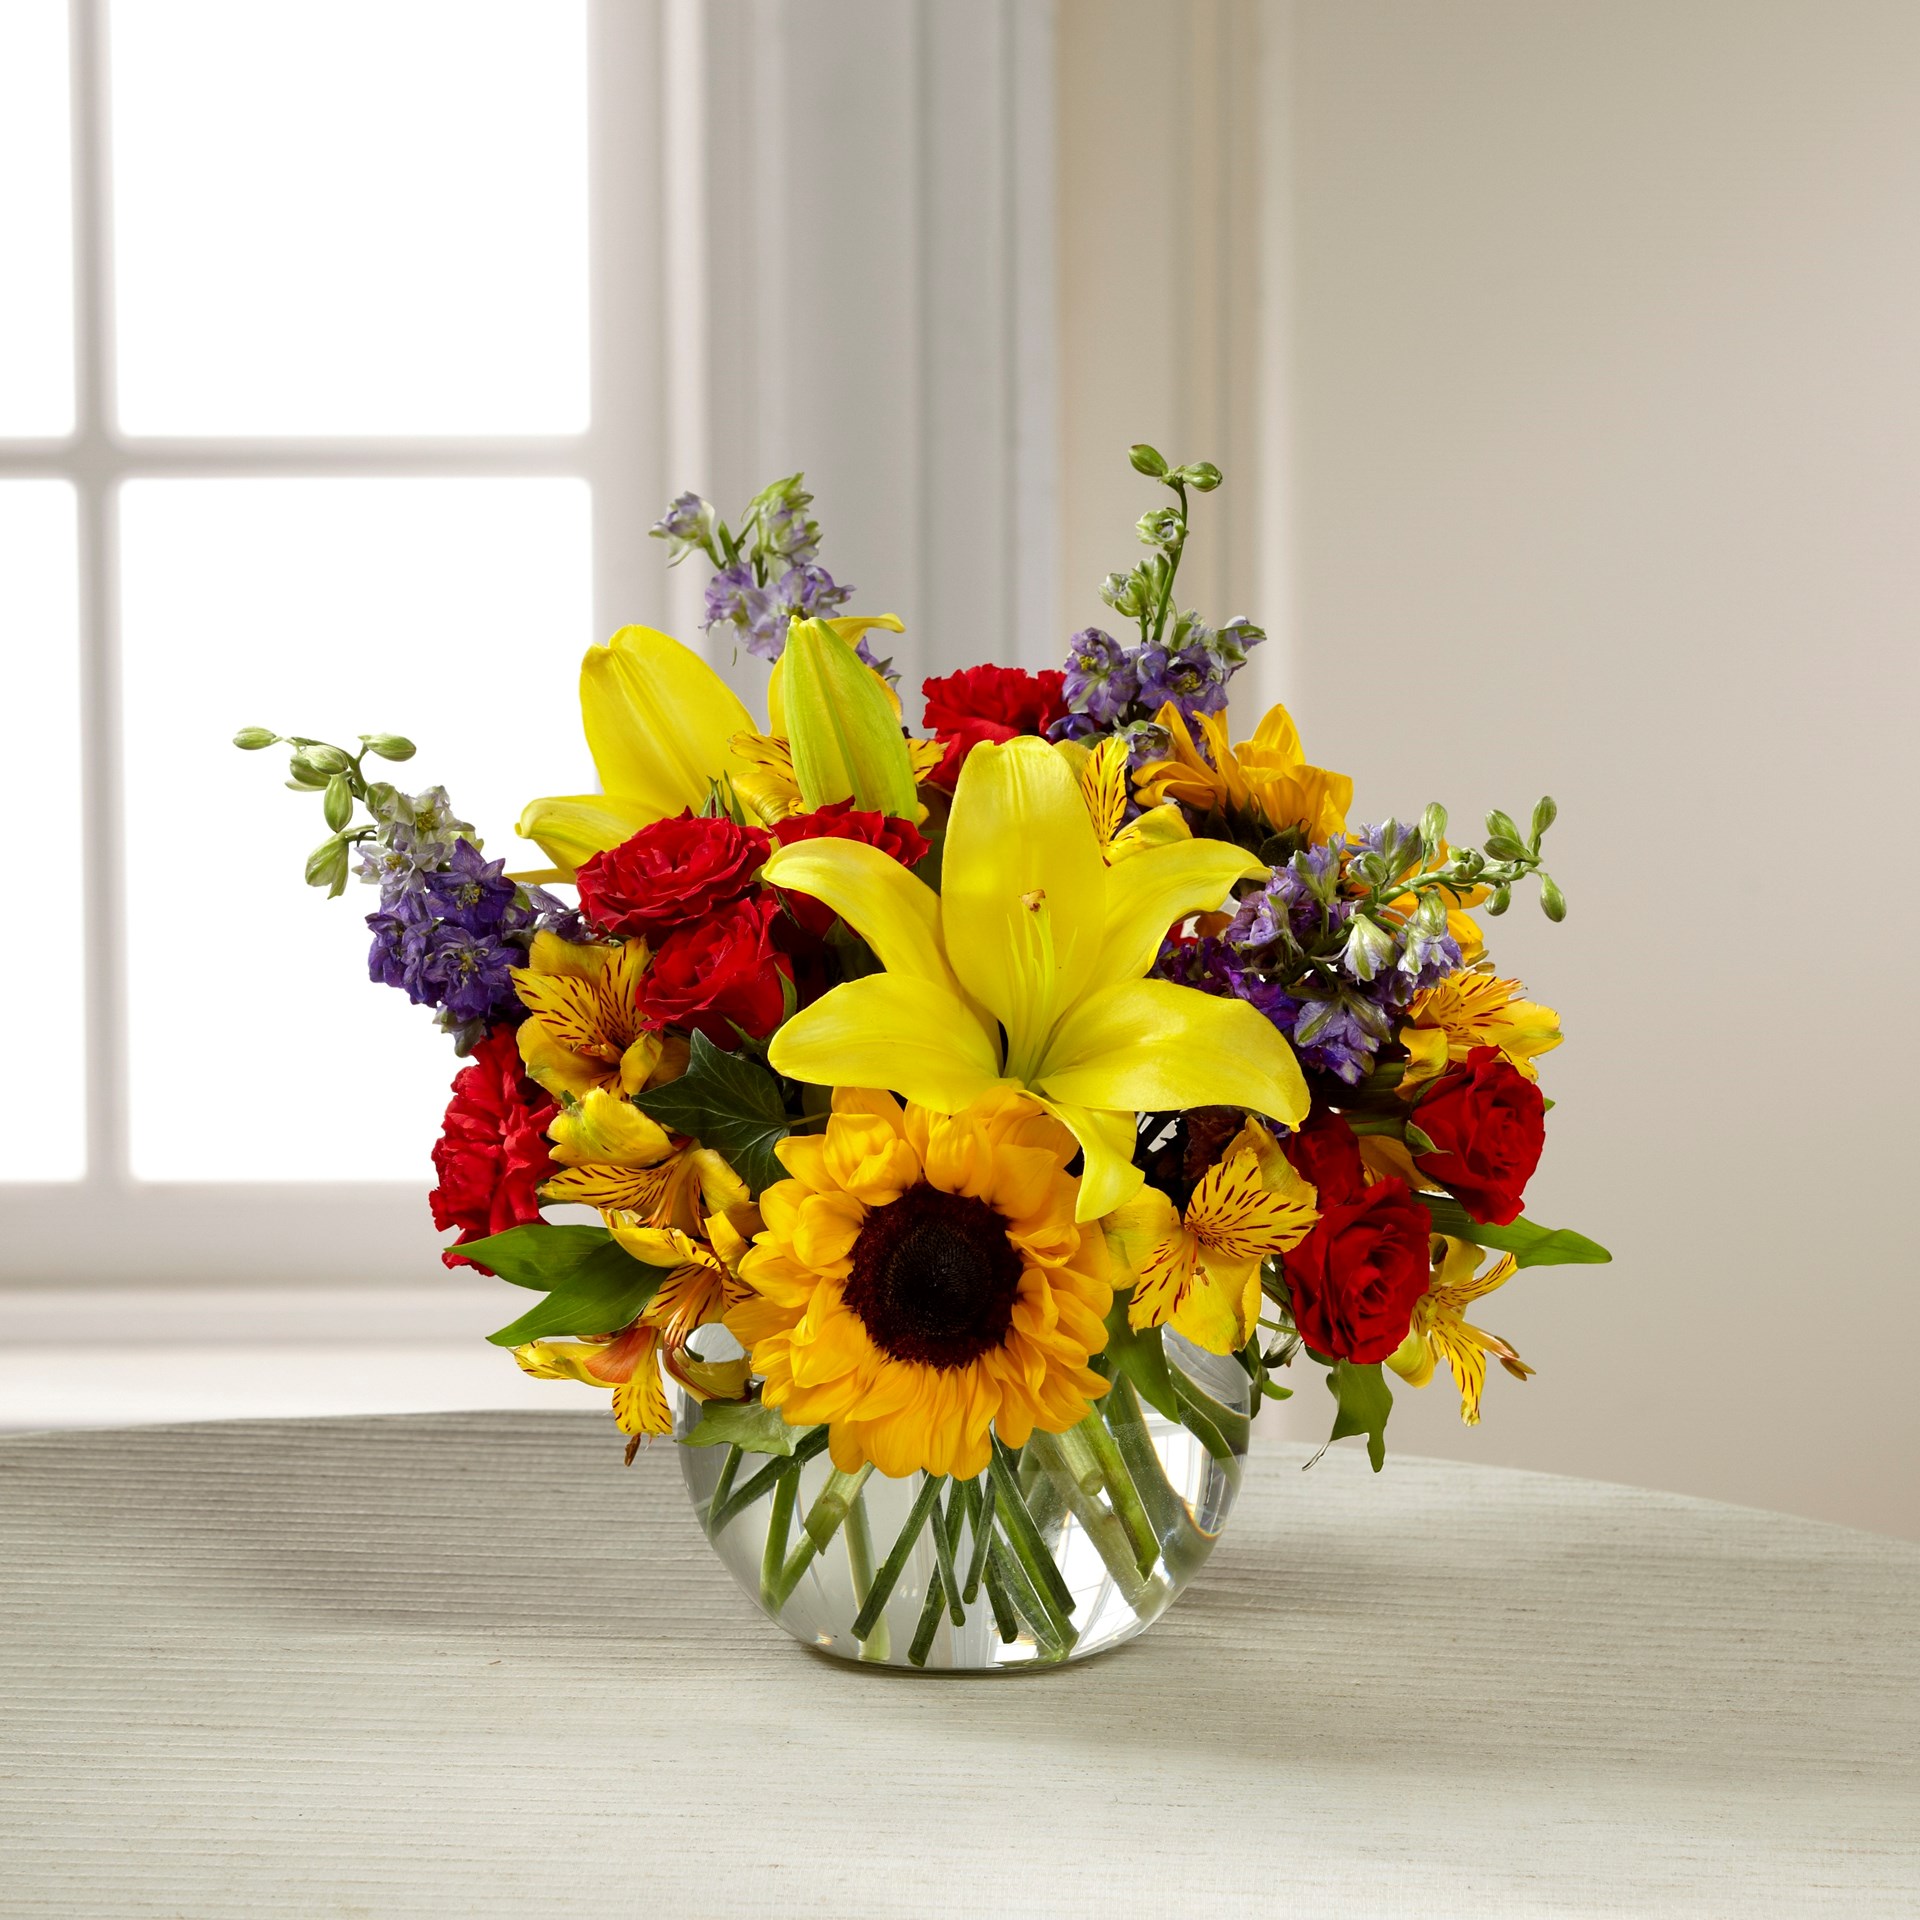 product image for The FTD All For You Bouquet